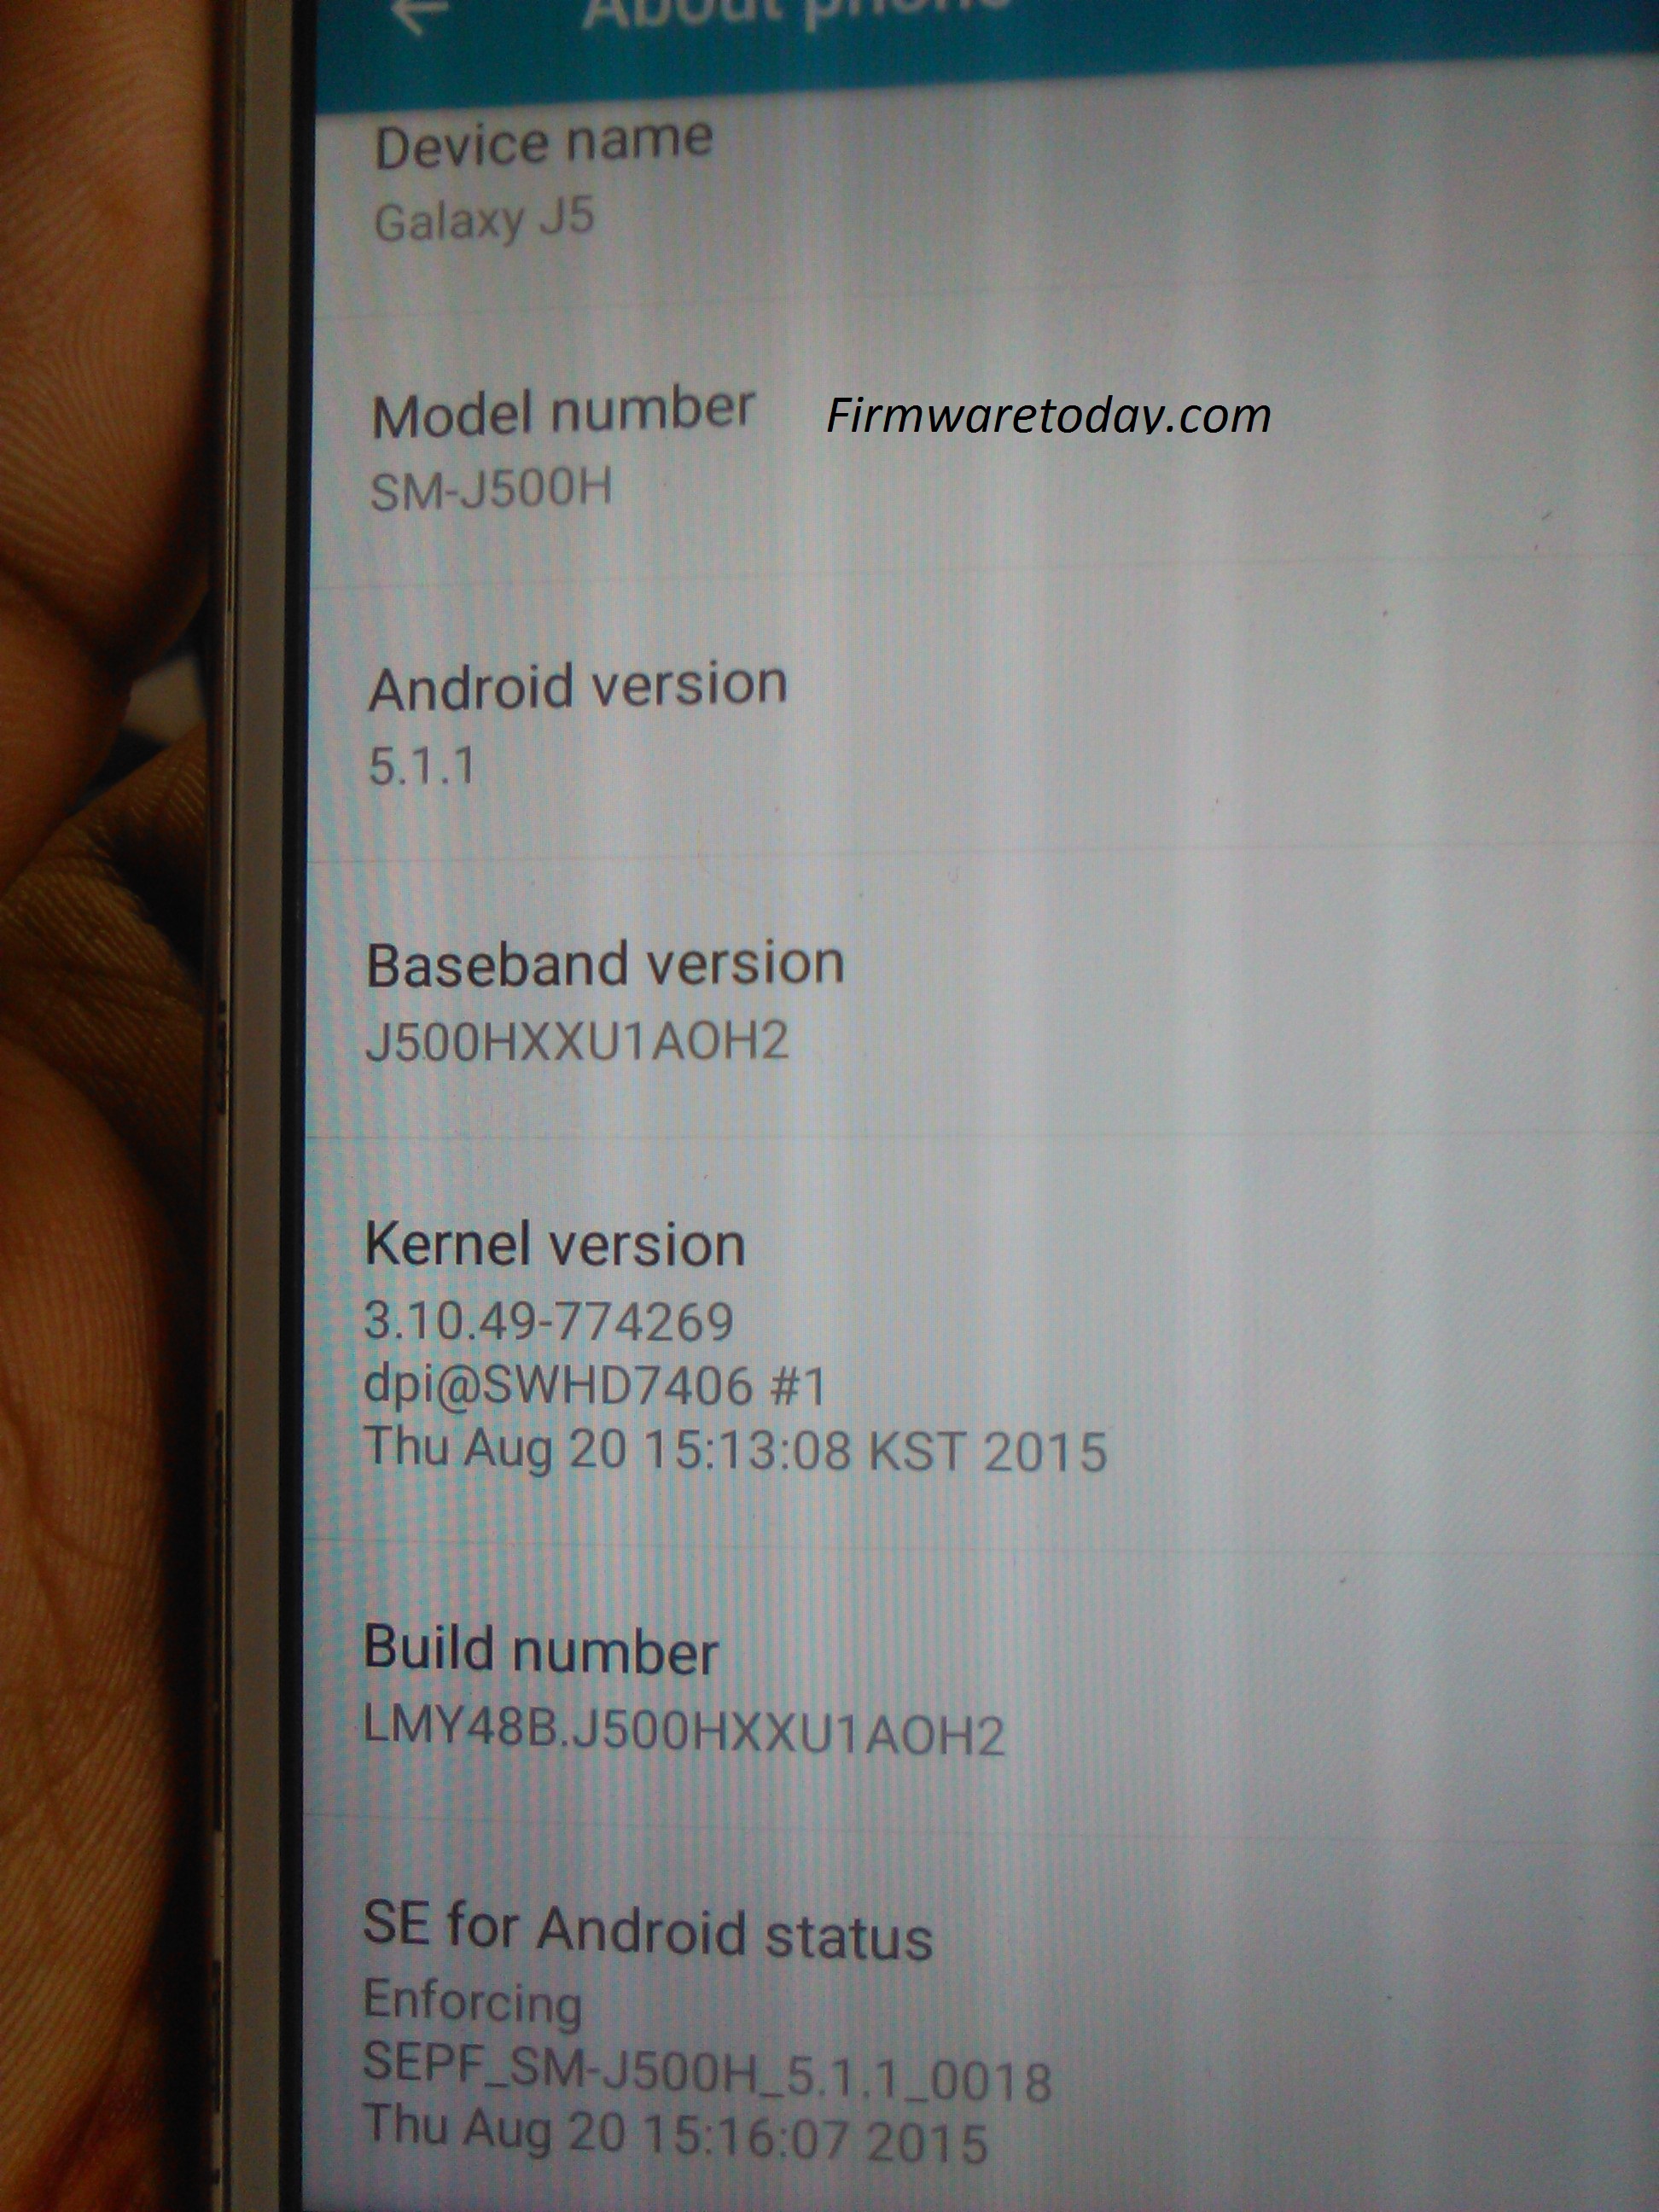 SAMSUNG J5 SM-J500H OFFICIAL FIRMWARE 3rd VERSION 5.1.1 UPDATE 20000%TESTED BY FIRMWARETODAY.COM